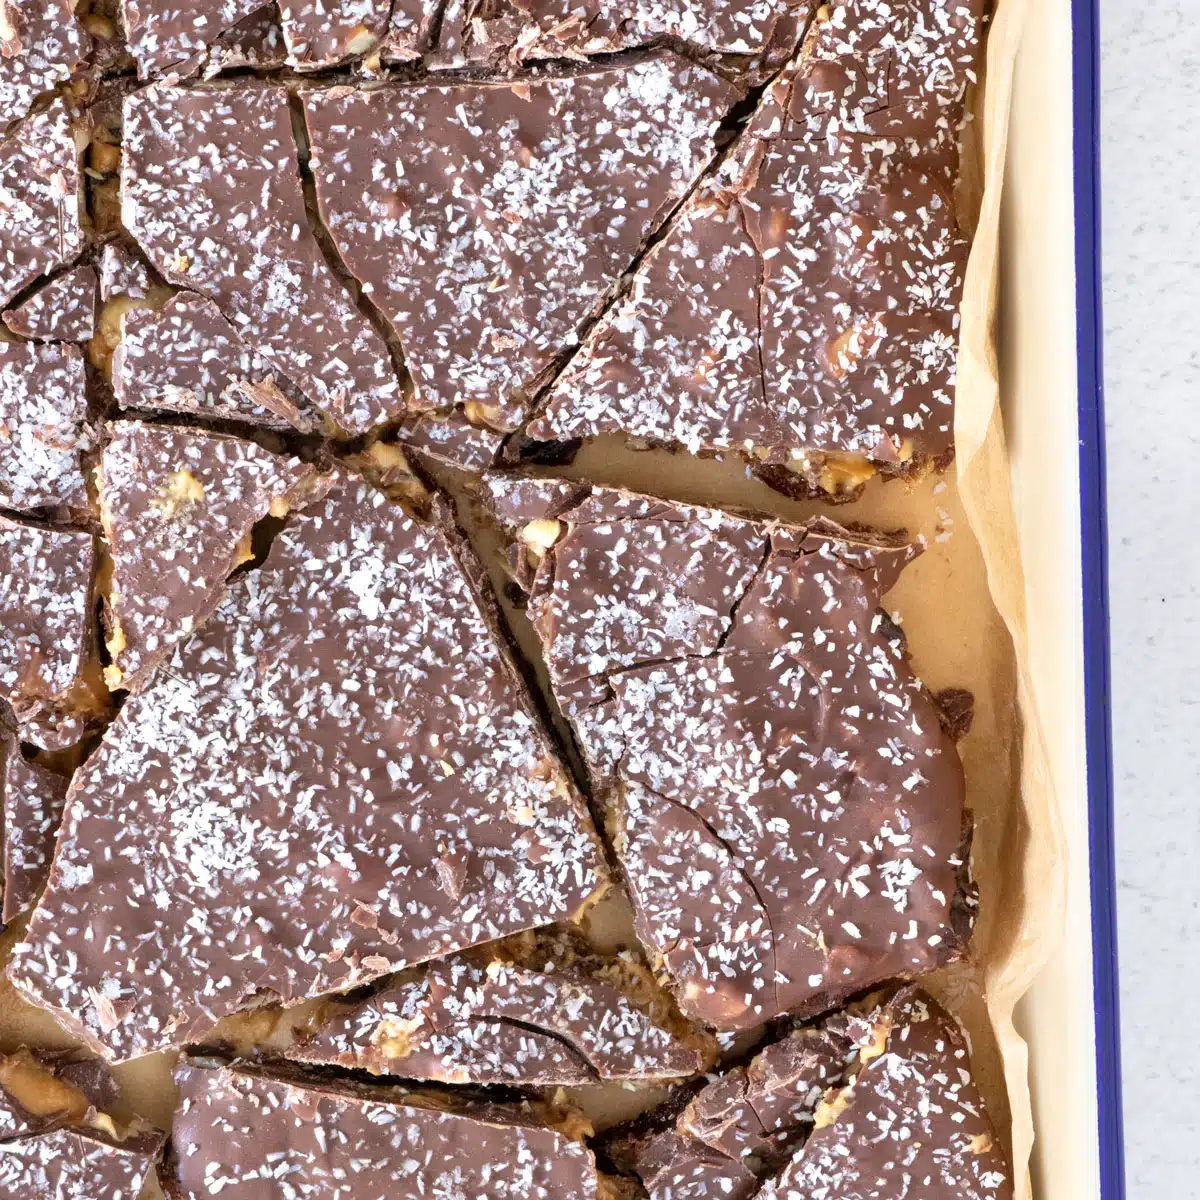 A square image showing a tray of chocolate date bark up close.